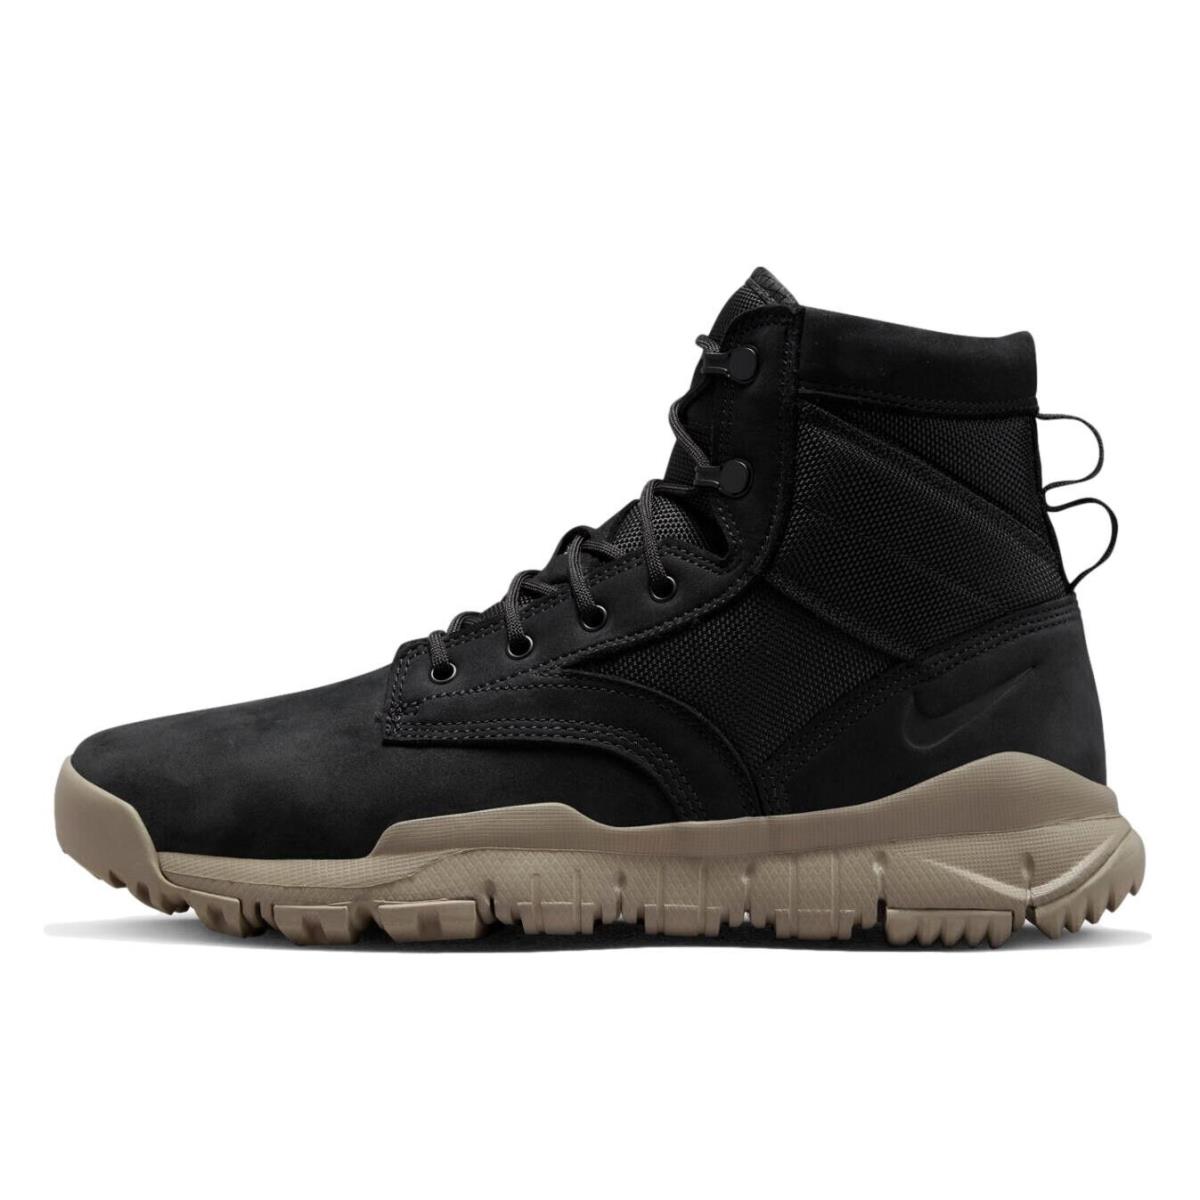 Size 8 - Nike Sfb 6 Nsw Leather Field High Boots `black Light Taupe` 862507-002